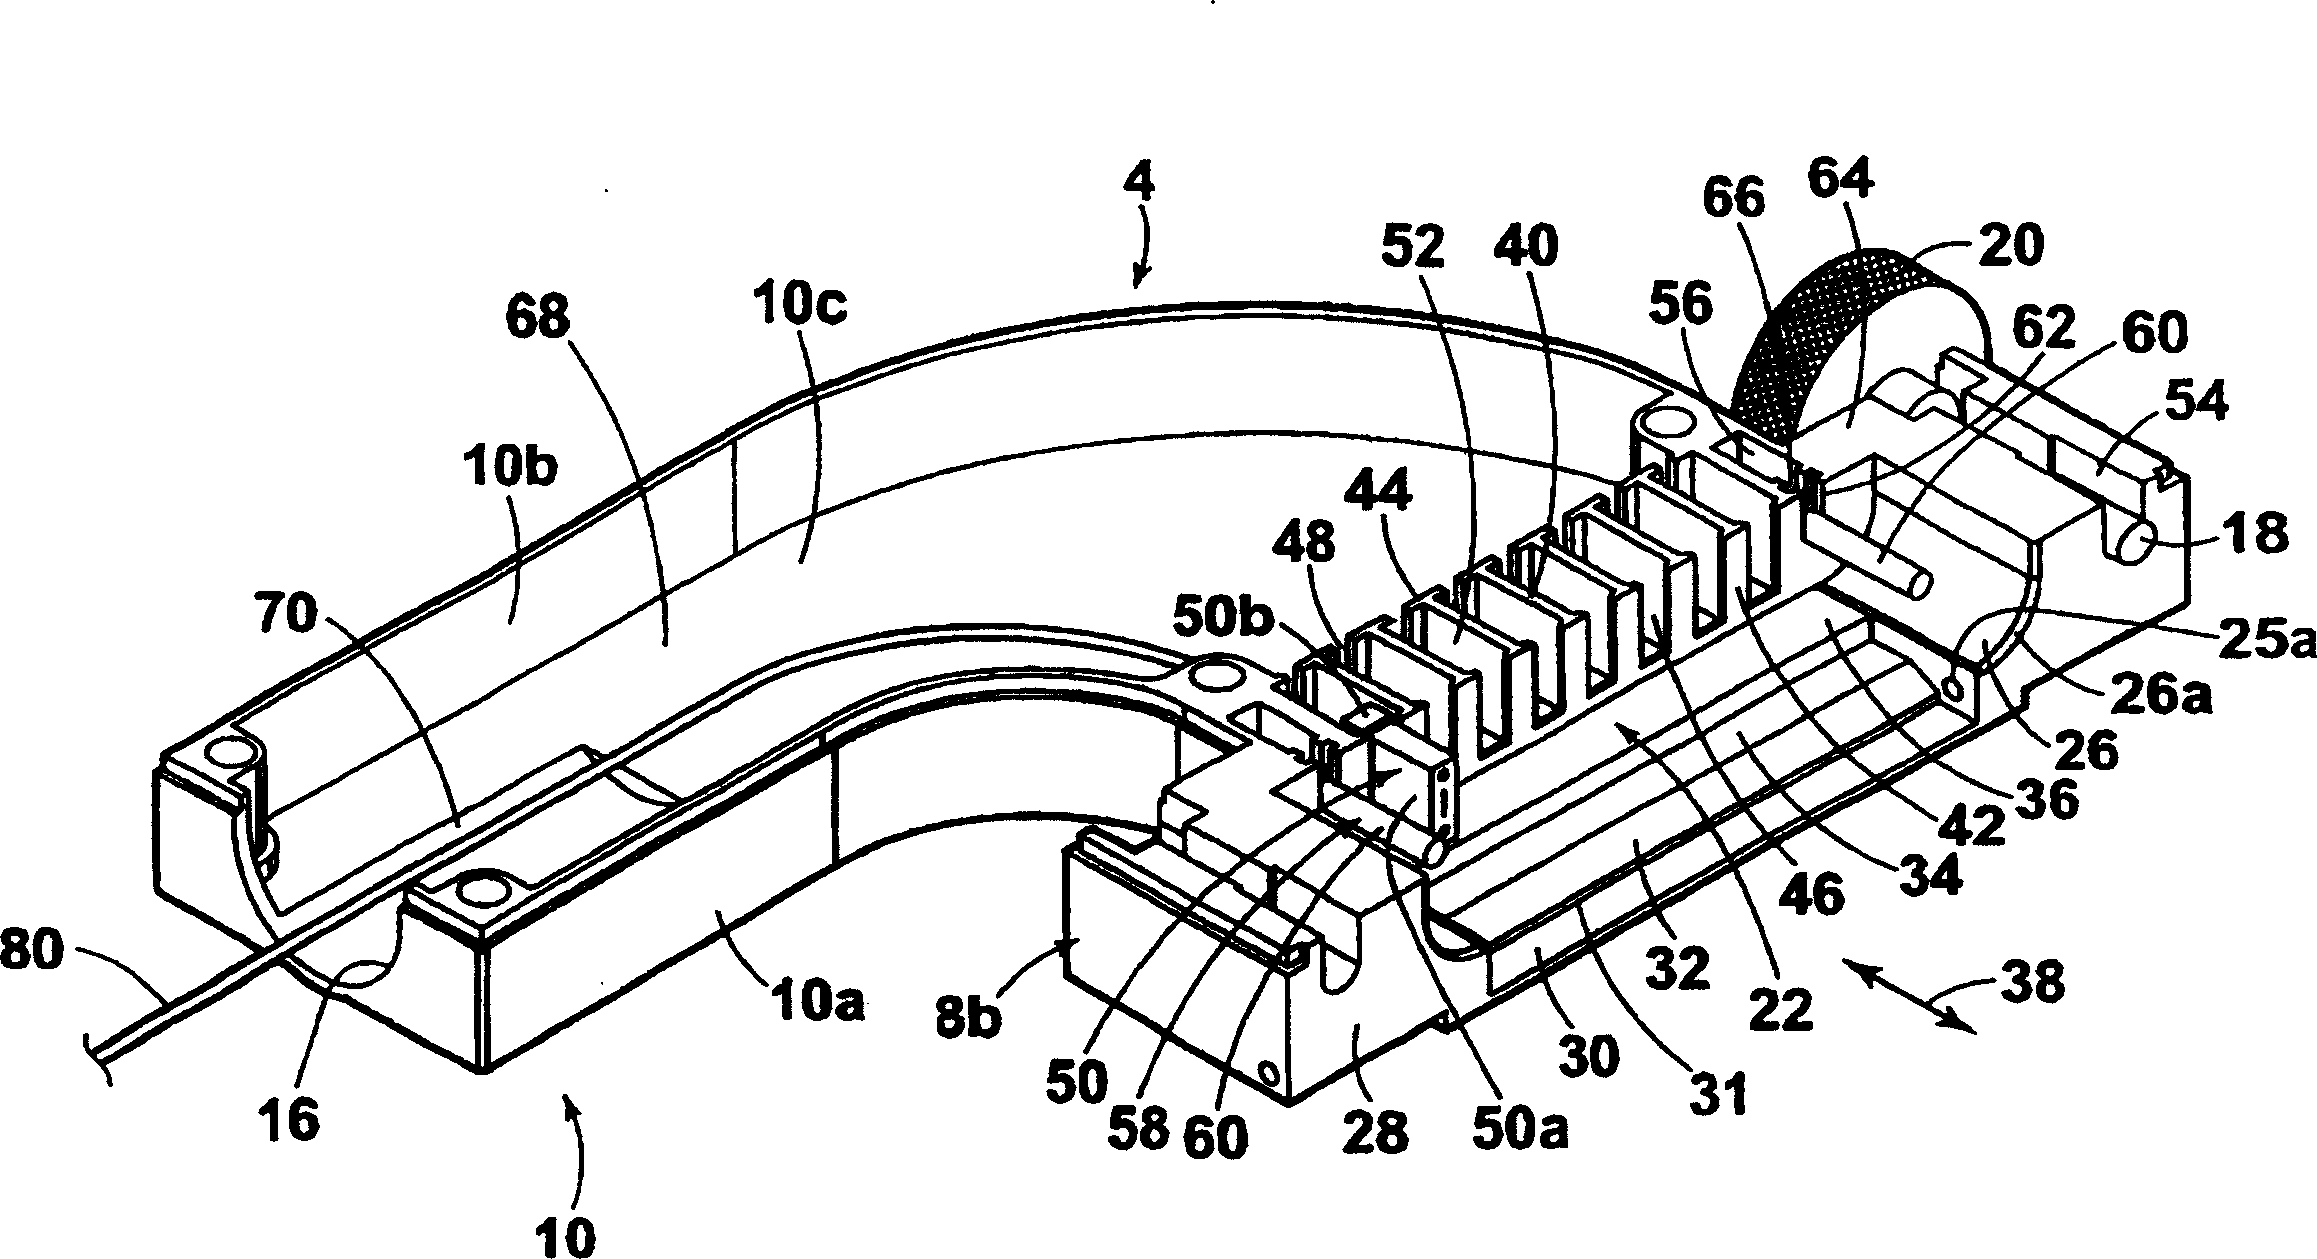 Multi- core optical connector assembly